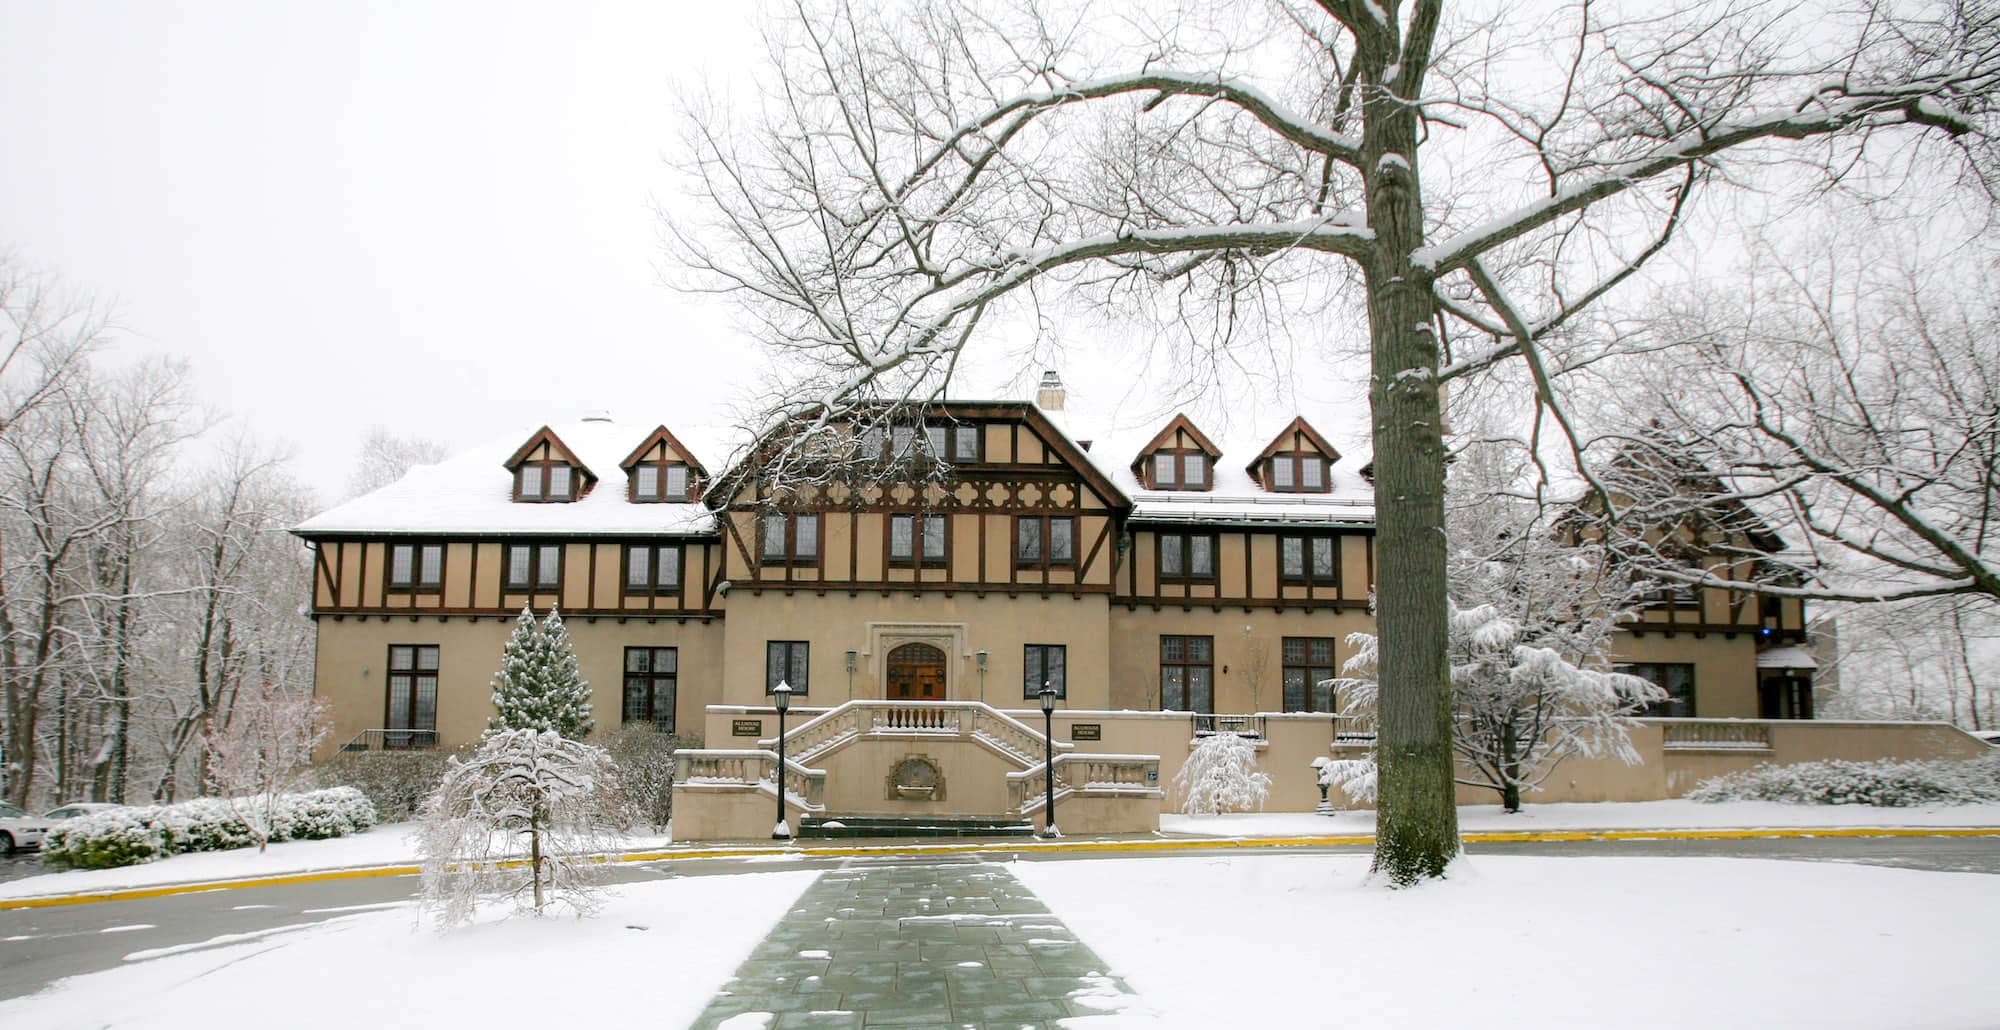 The front exterior of Alumnae House on the Vassar campus, a large beige building with a red roof and many windows across the entire building, covered in snow.